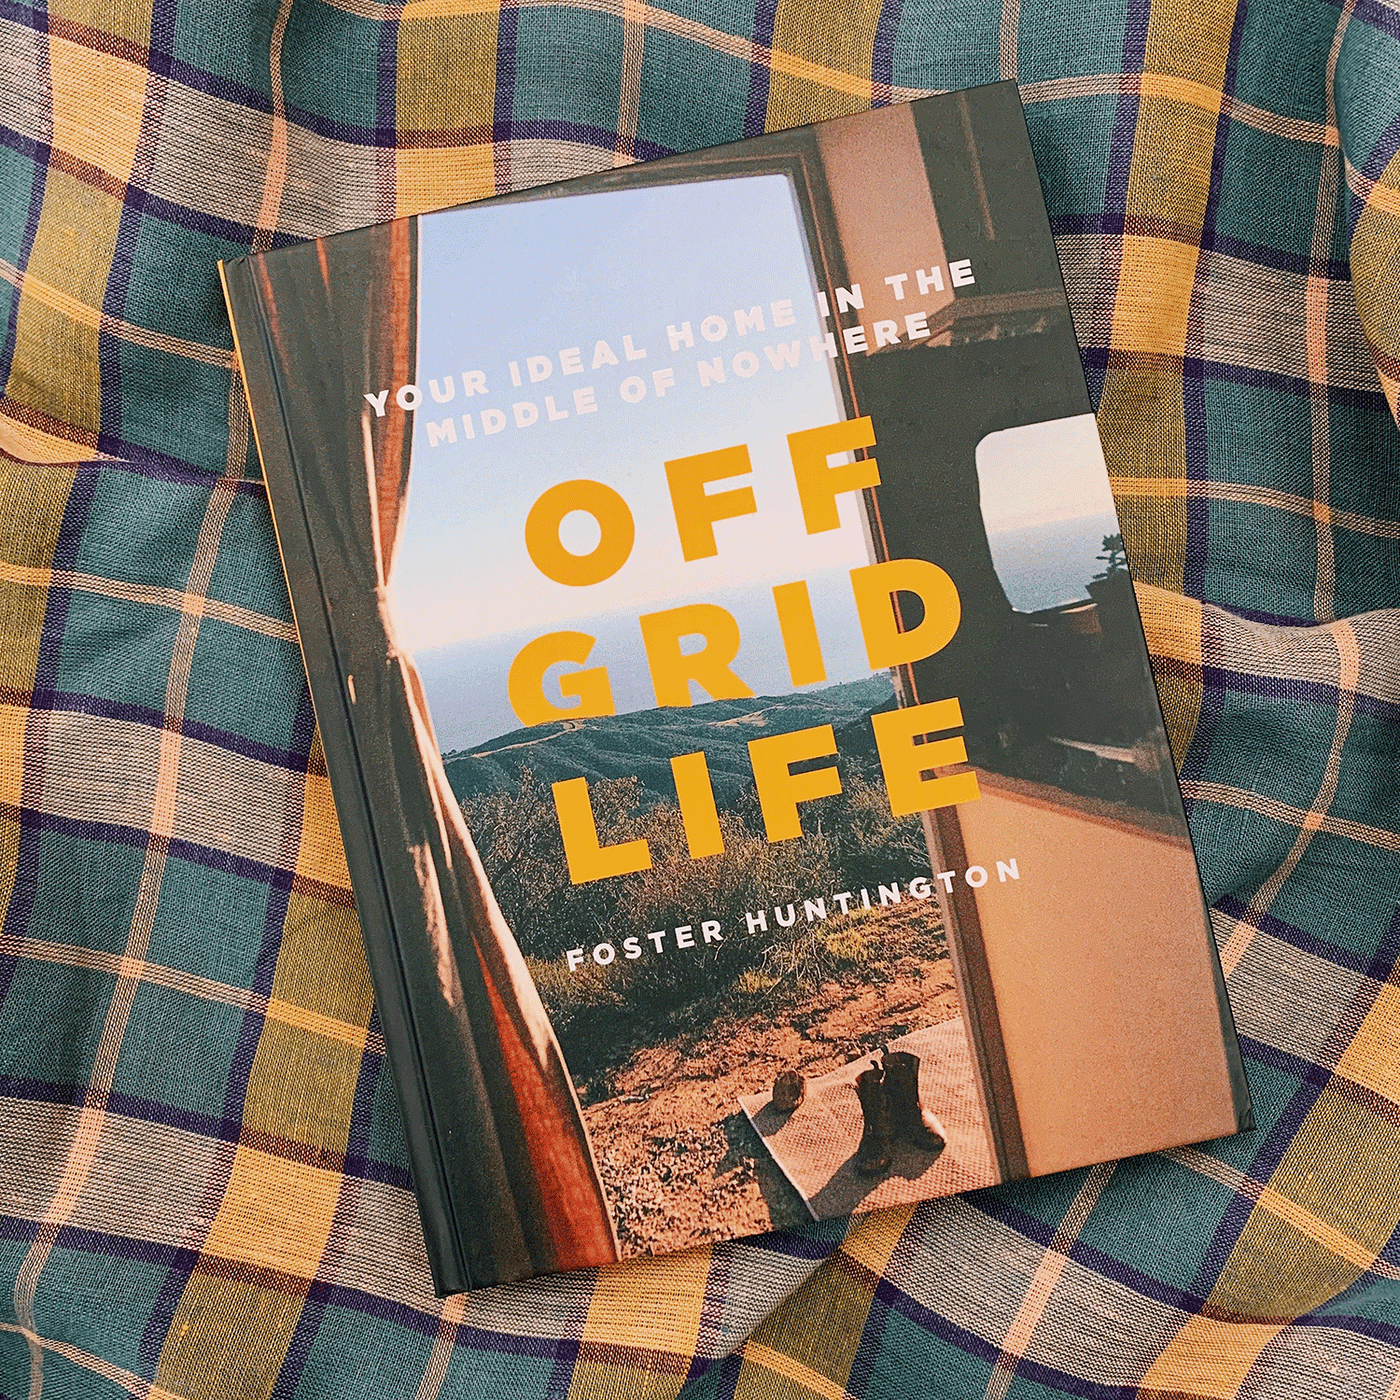 Off Grid Life by Foster Huntington